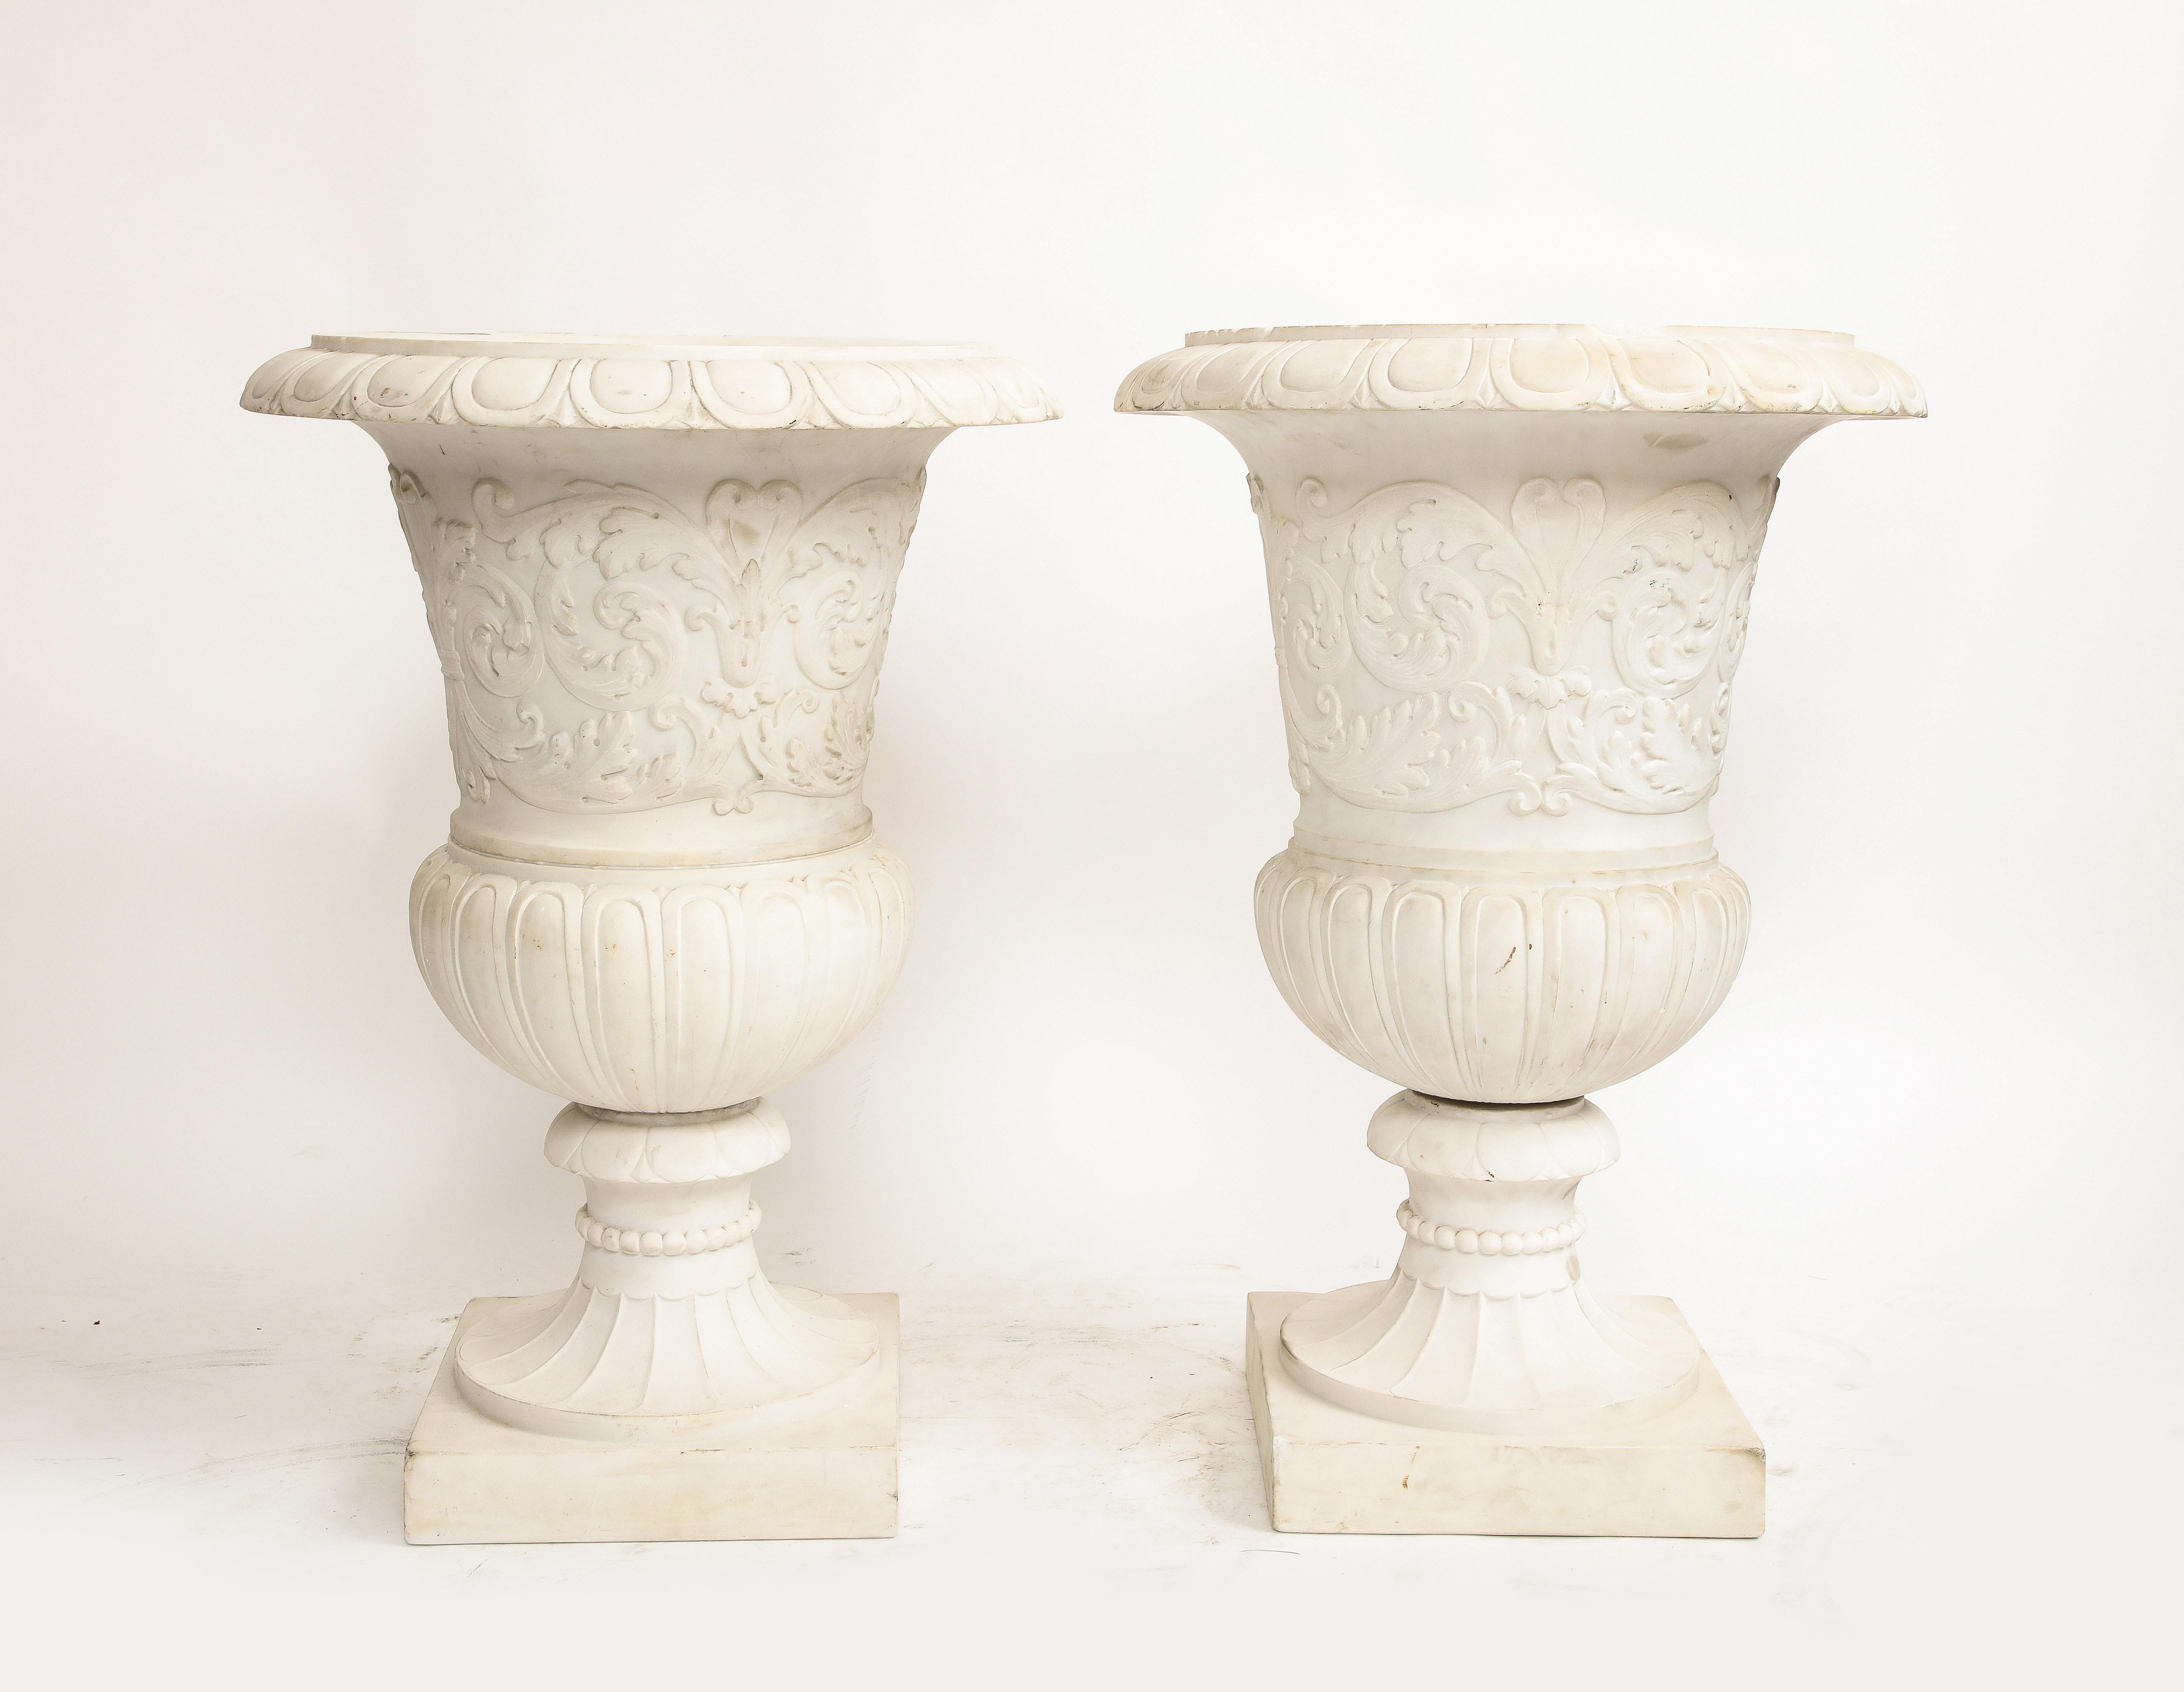 A Magnificent Pair of Italian Carrara Marble Medici Vases with Neoclassical Motifs in Relief.  Standing tall at an impressive height of 30 inches, these vases are a testament to the impeccable artistry inherent to Carrara marble.
Exhibiting